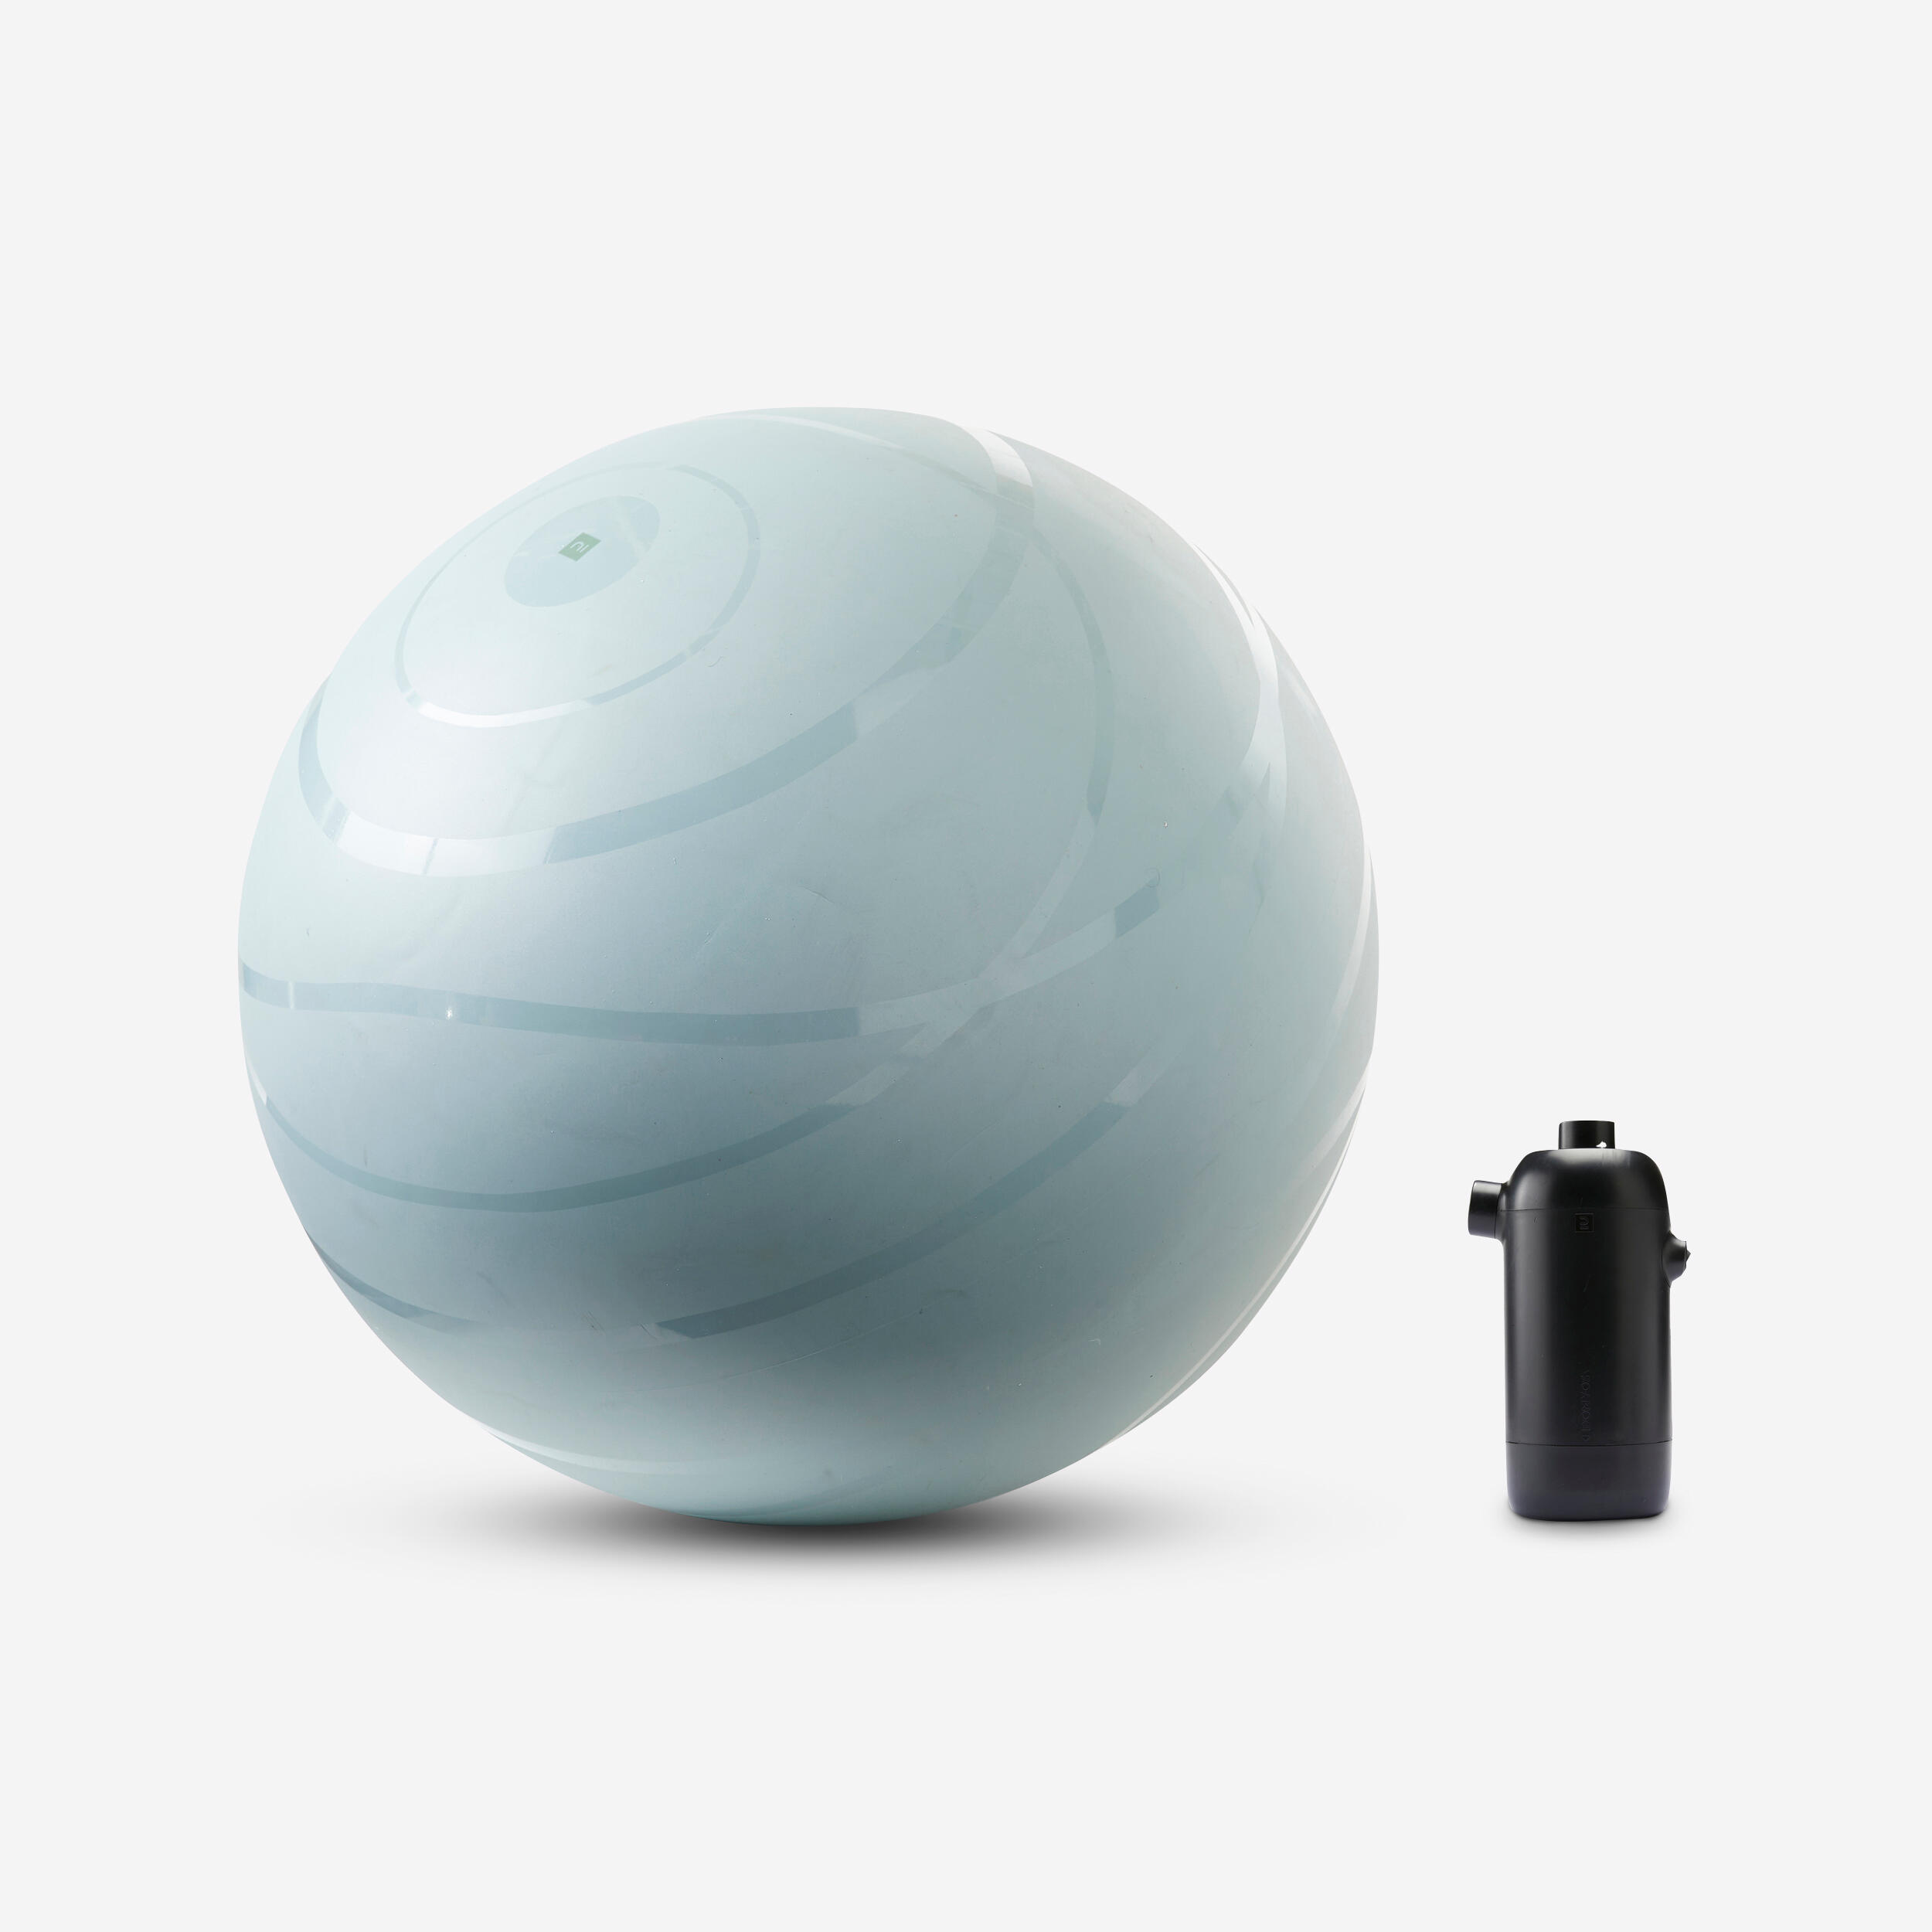 Gym Ball with Pump Included for Quick Inflation/Deflation Size 1/55 cm 1/6